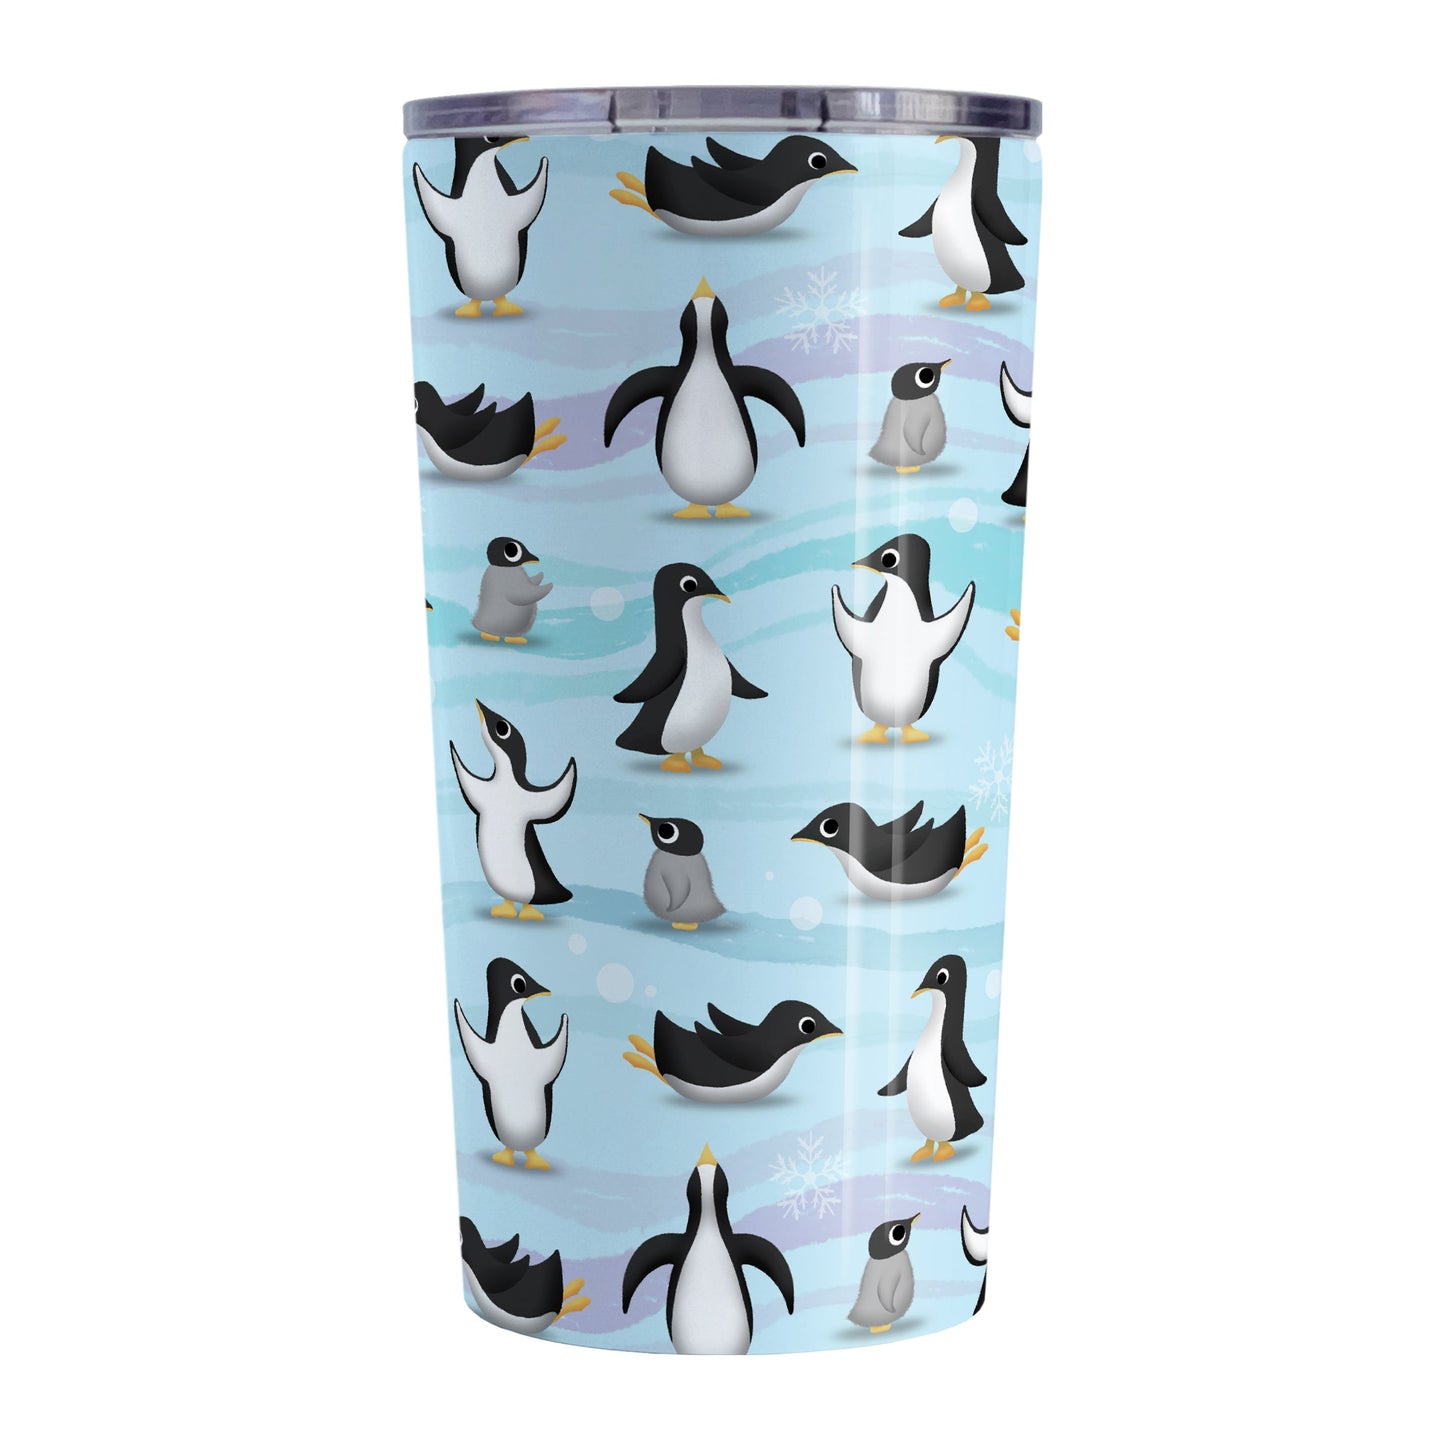 Penguin Parade Pattern Tumbler Cup (20oz, stainless steel insulated) at Amy's Coffee Mugs. Penguin Parade Pattern Mug at Amy's Coffee Mugs. A tumbler cup designed with a fun penguin parade pattern featuring a variety of penguins and baby penguins over an Antarctic background with waves of blue, turquoise, and purple colors with hints of snowflakes that wraps around the cup.